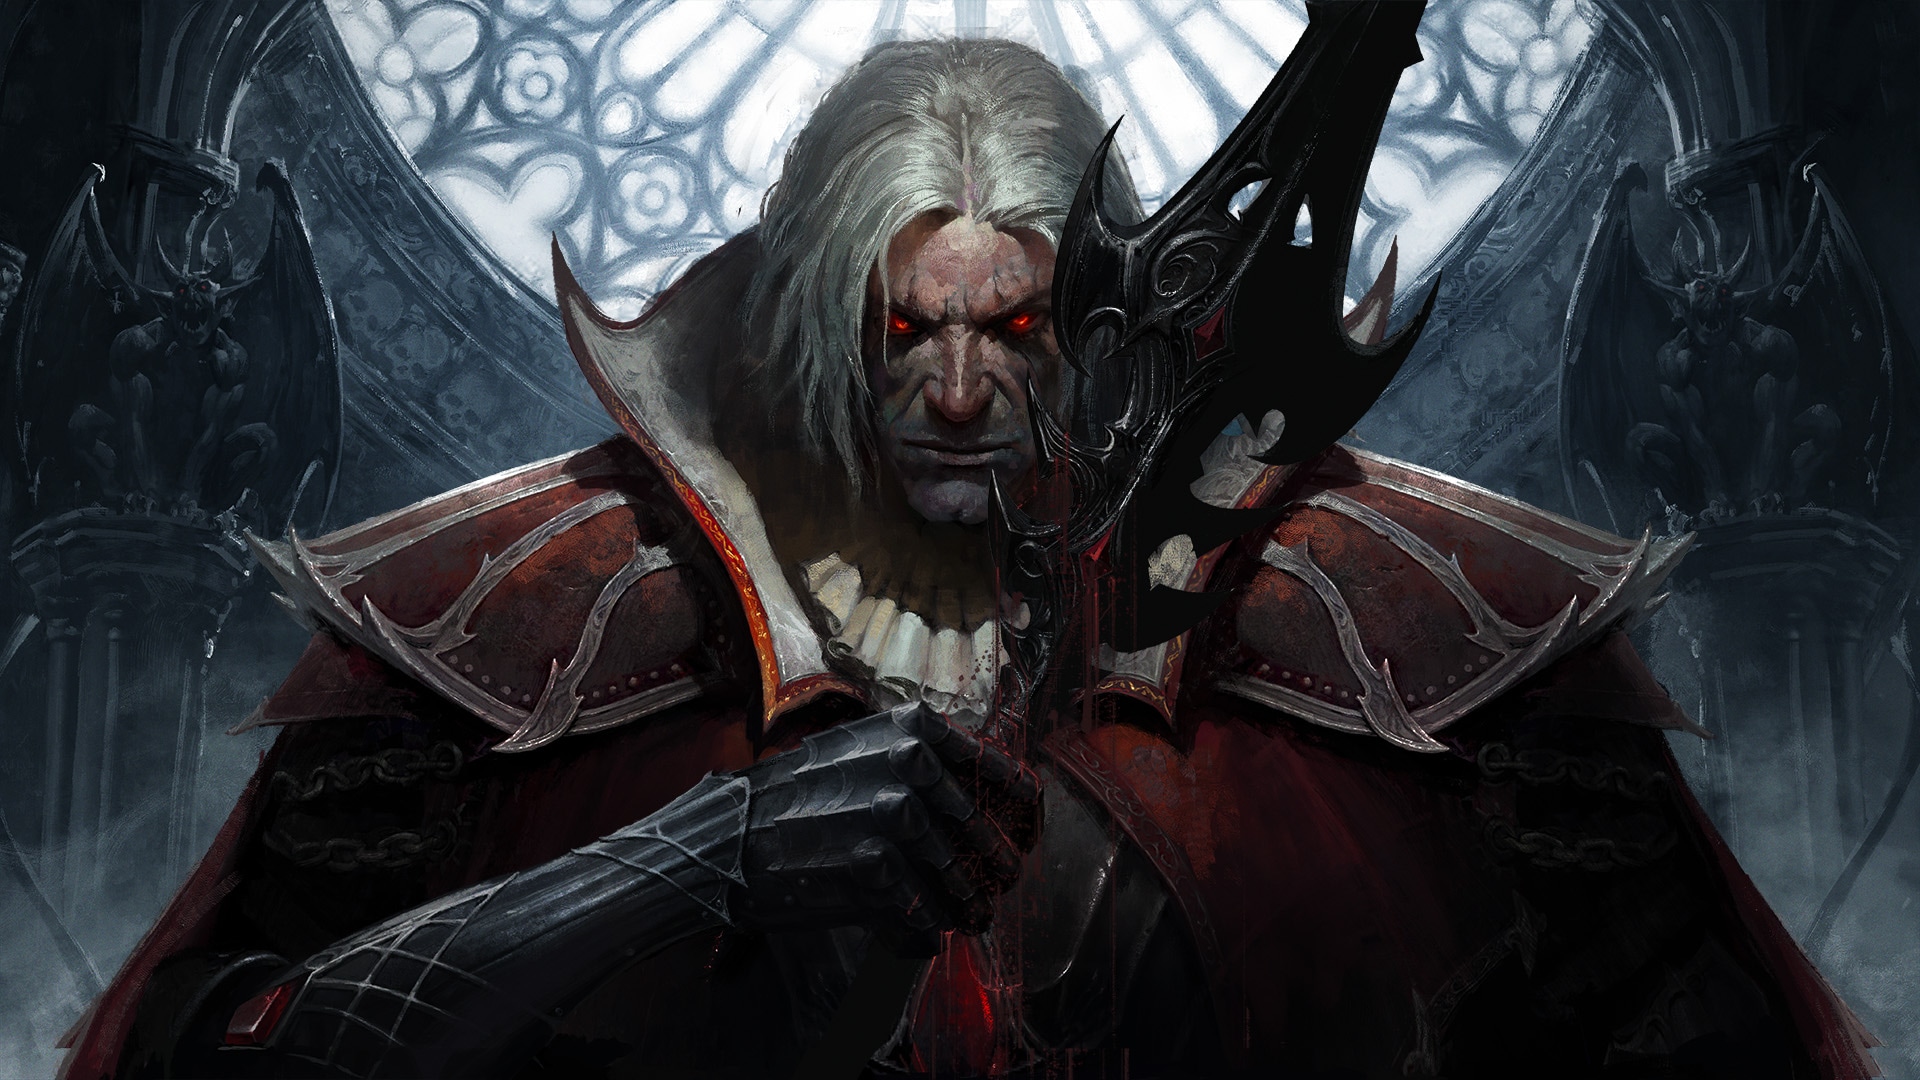 Best PvE Builds for Blood Knight in Diablo Immortal in 2024